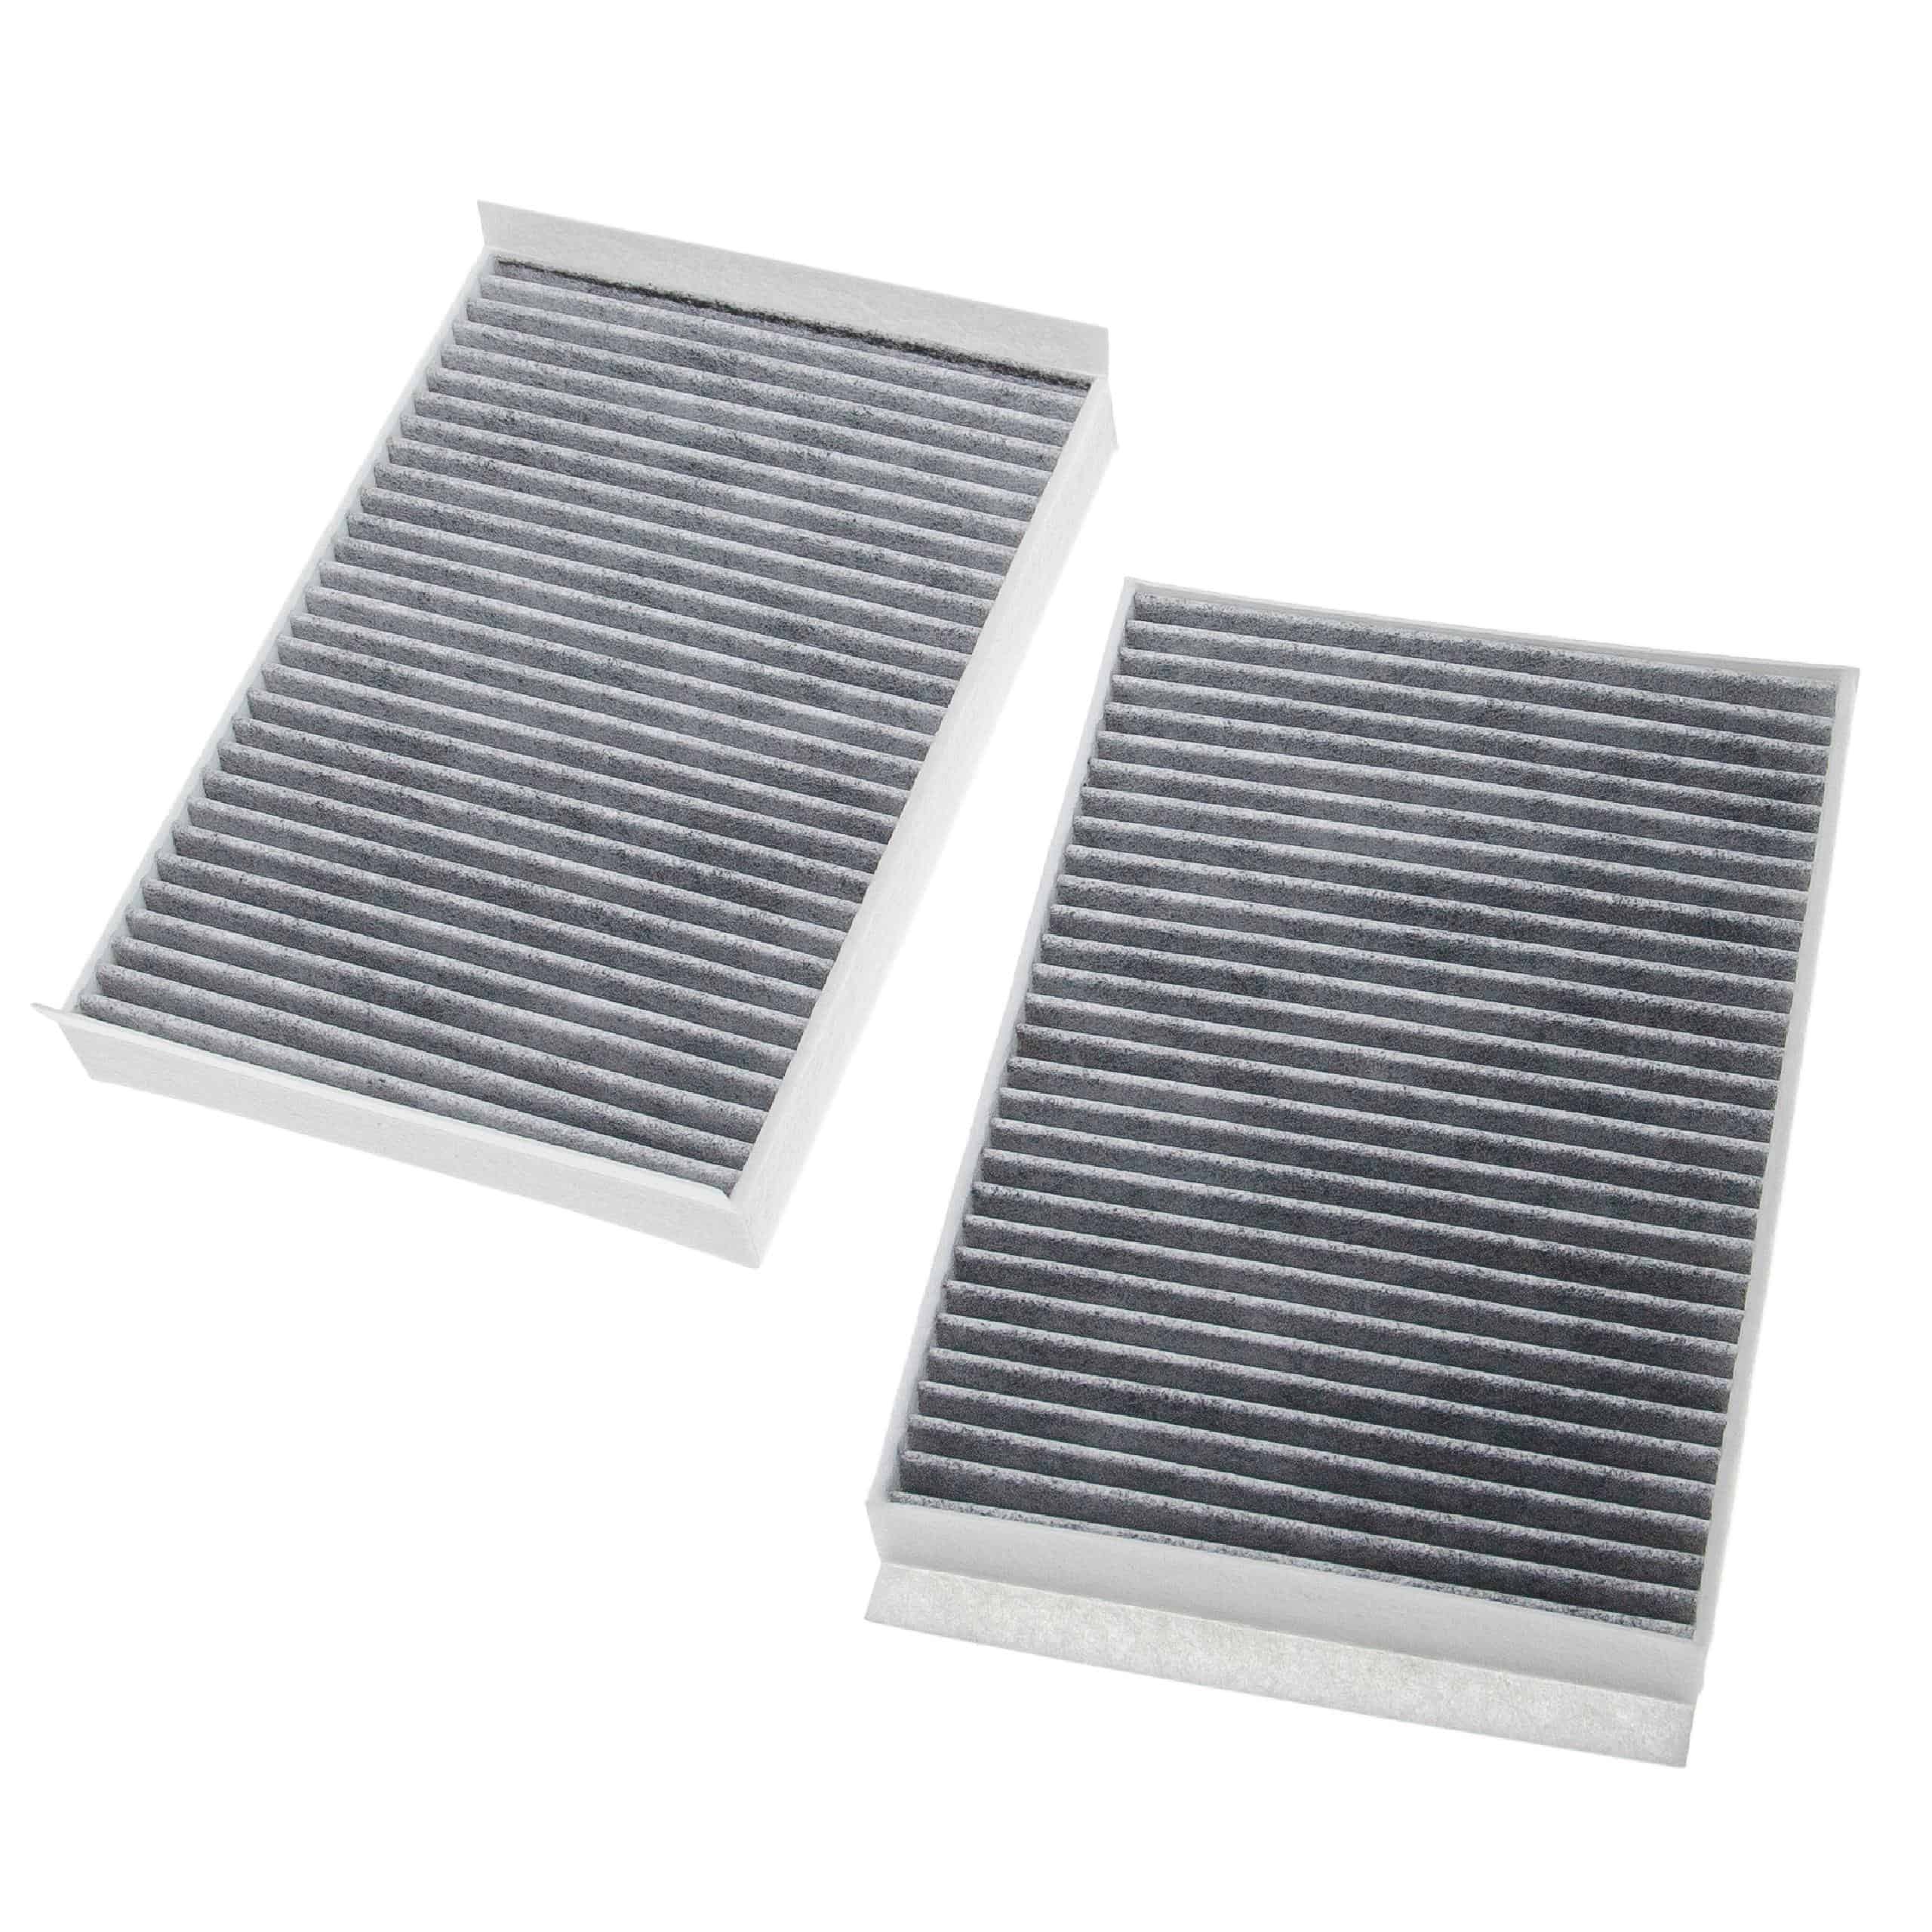 2x Cabin Air Filter replaces ACDelco PUK 1174 E